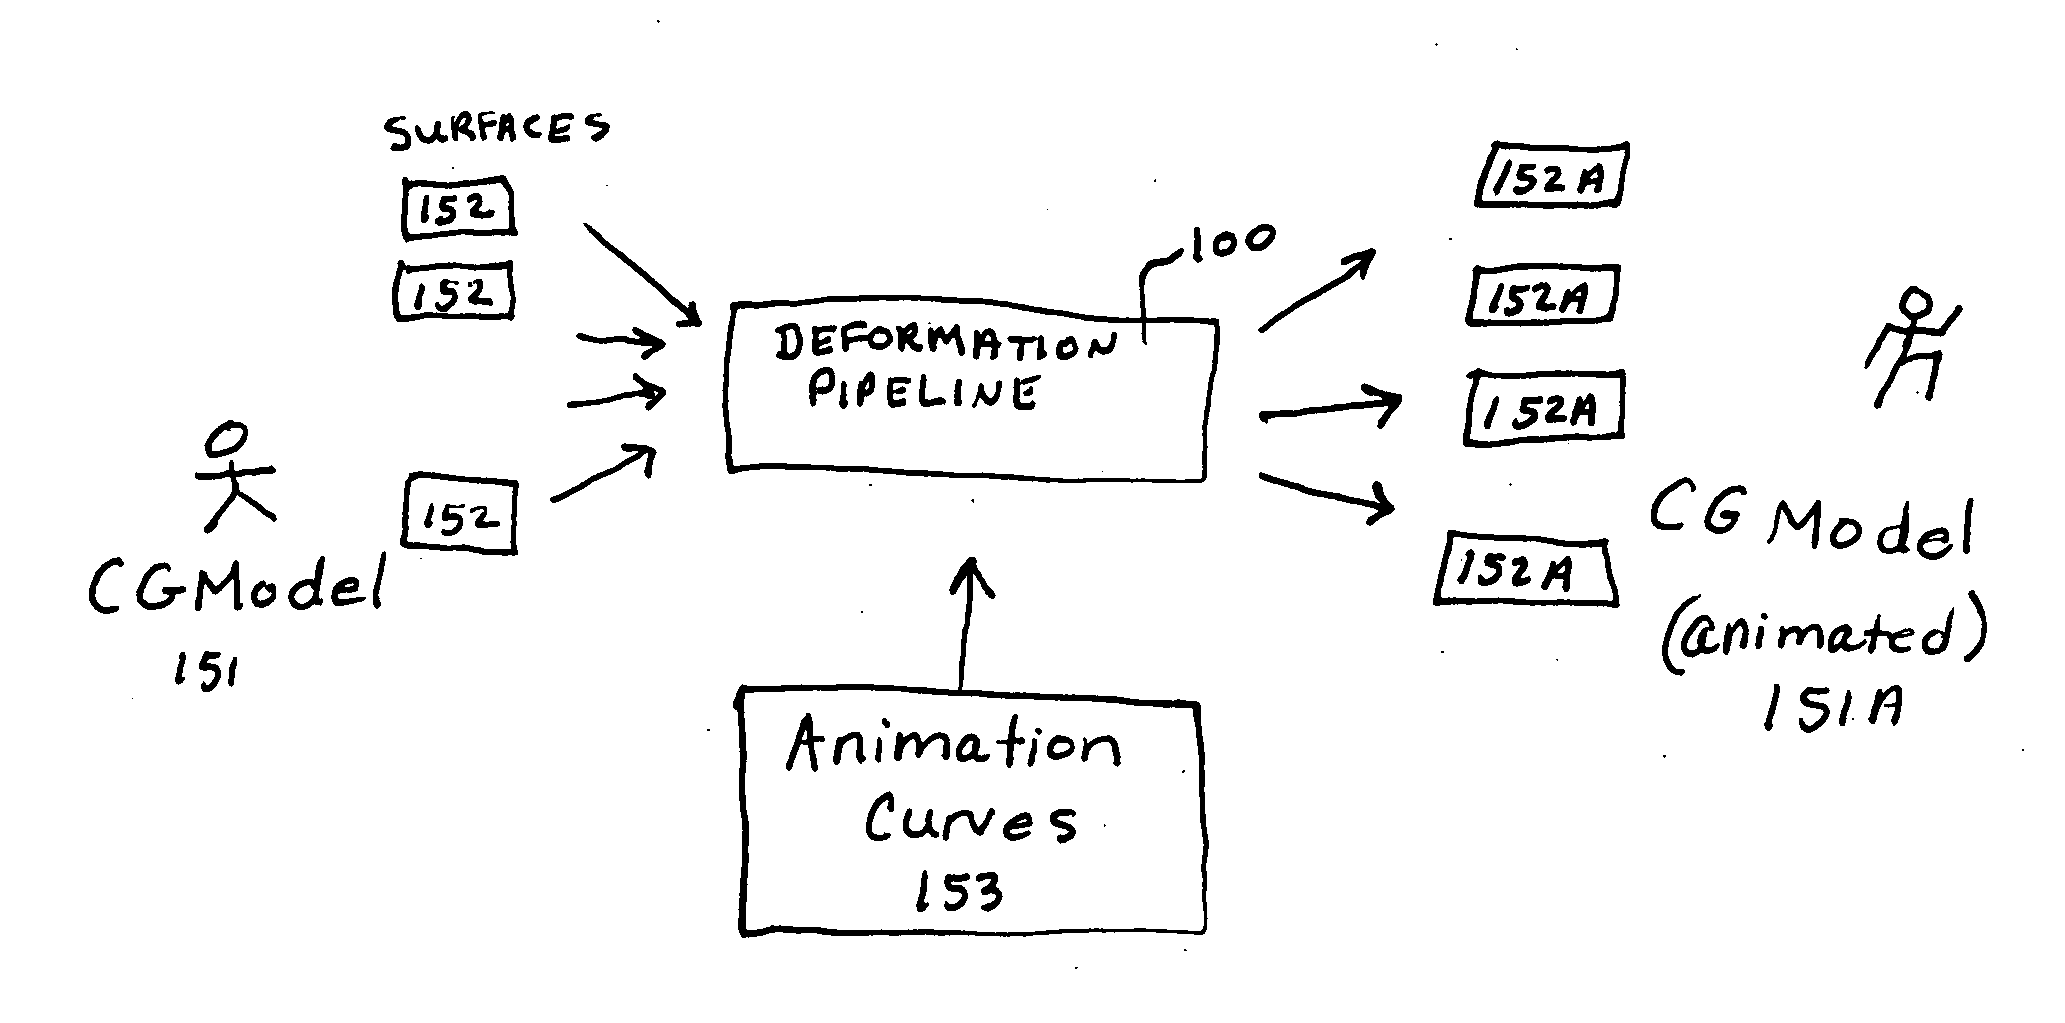 Character deformation pipeline for computer-generated animation